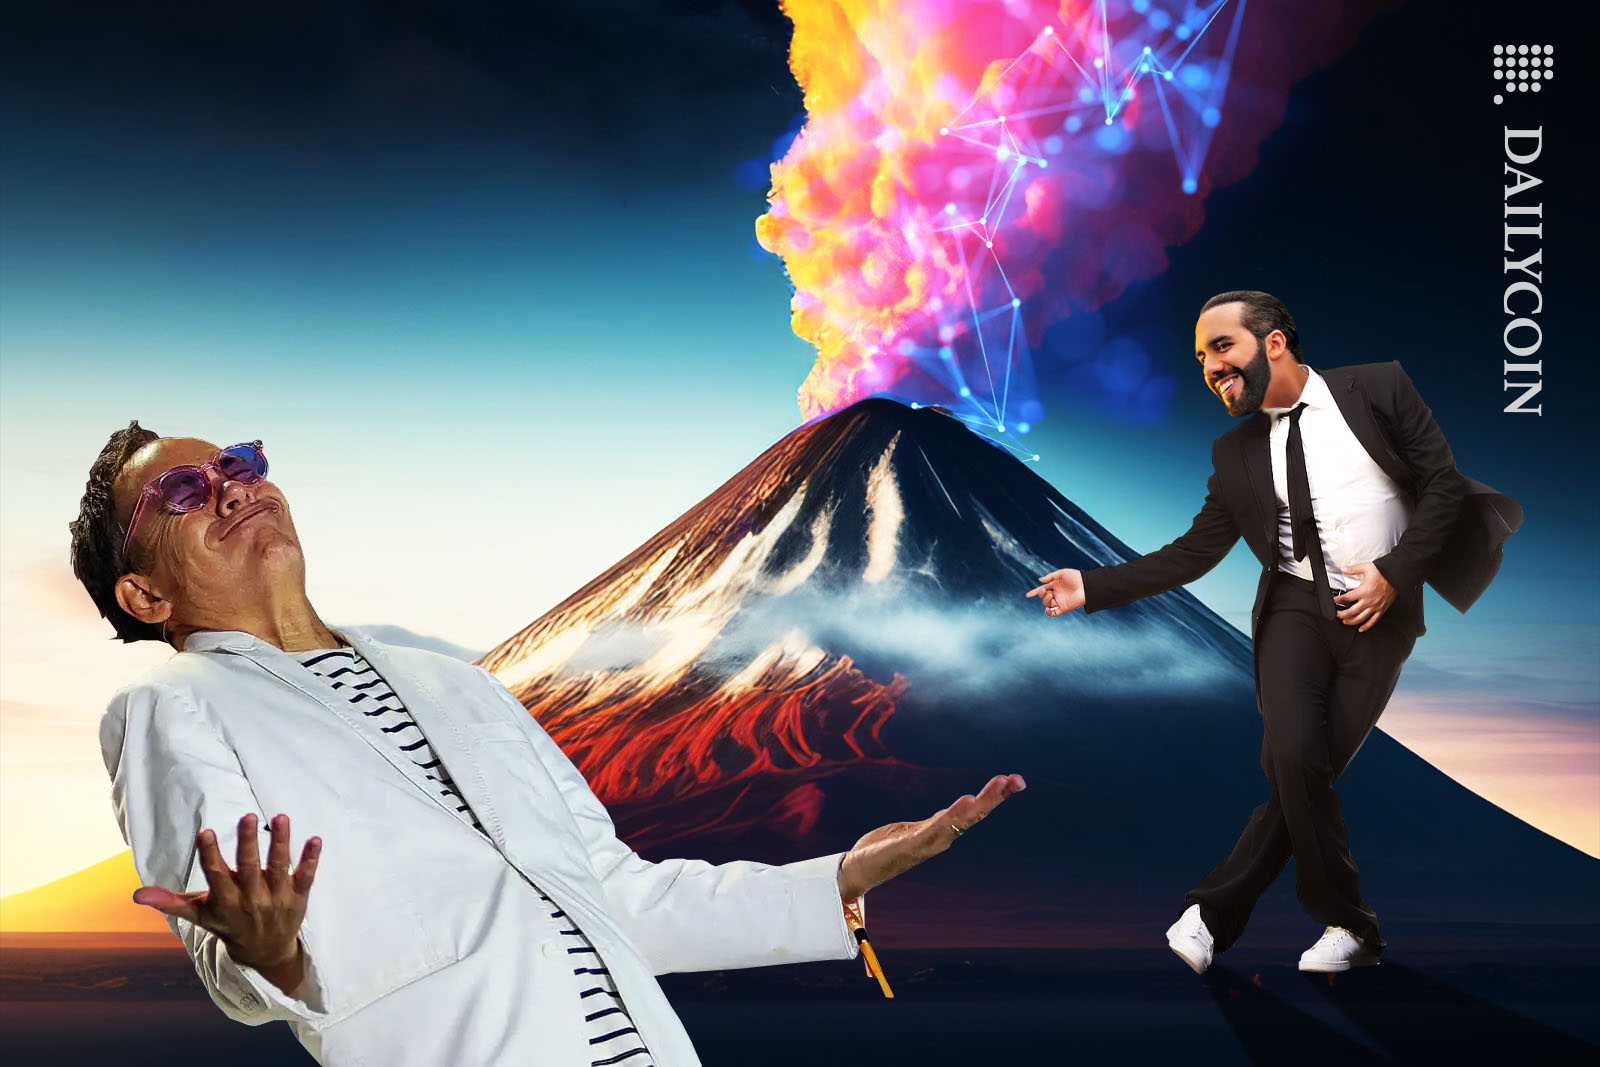 Max Kaiser and Nayib Bukele are super excited, dancing around a smoking volcano.